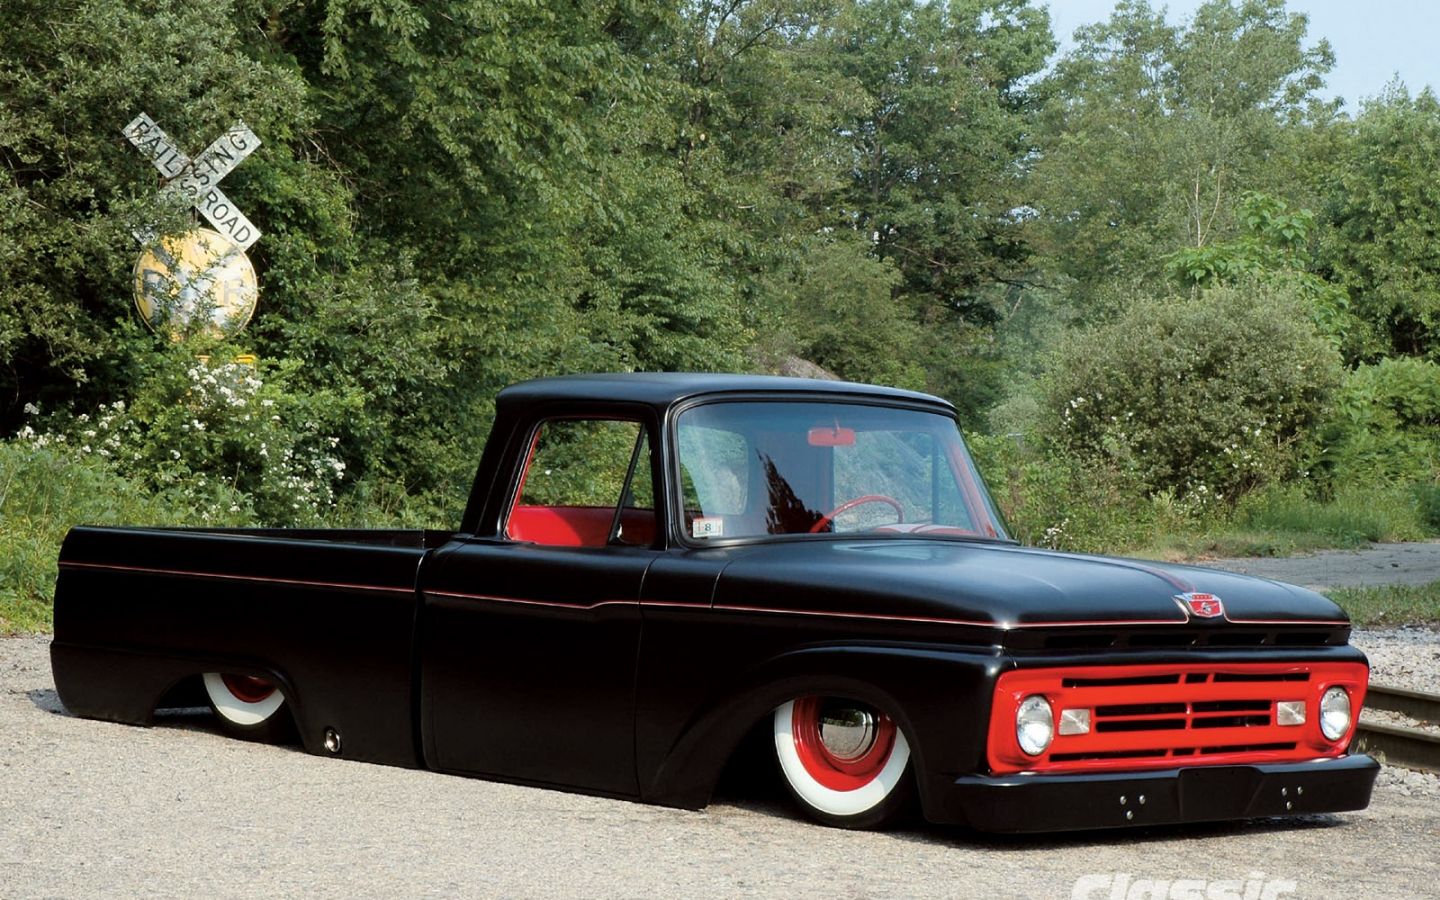 Black ford f-100 modded extremely low